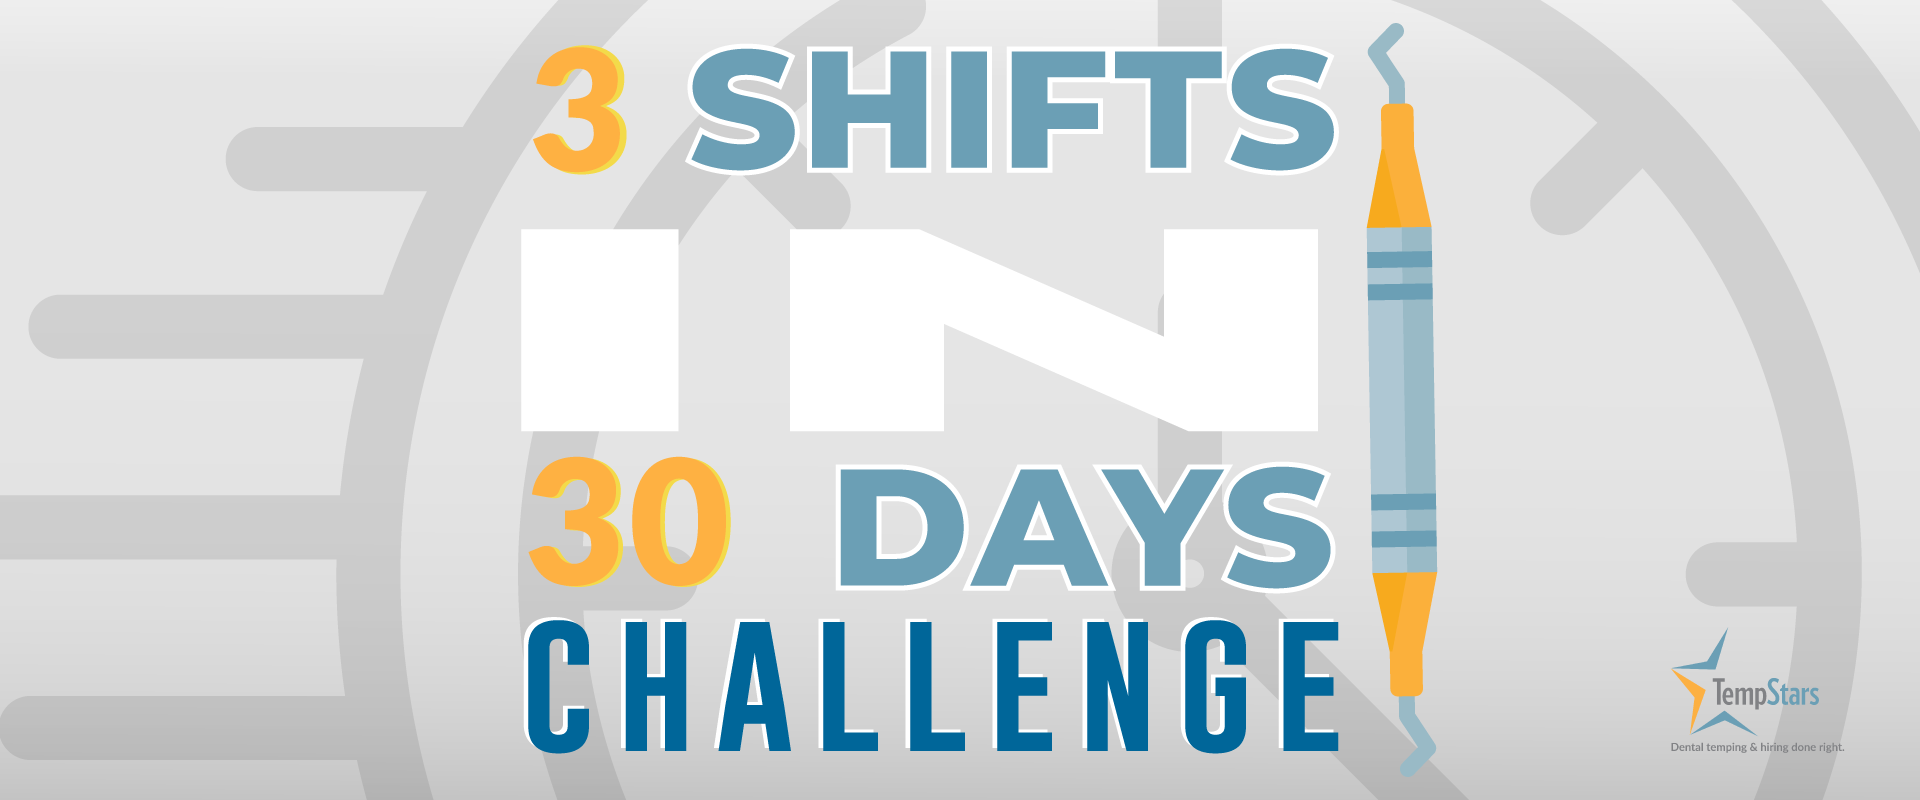 3 Shifts in 30 Days